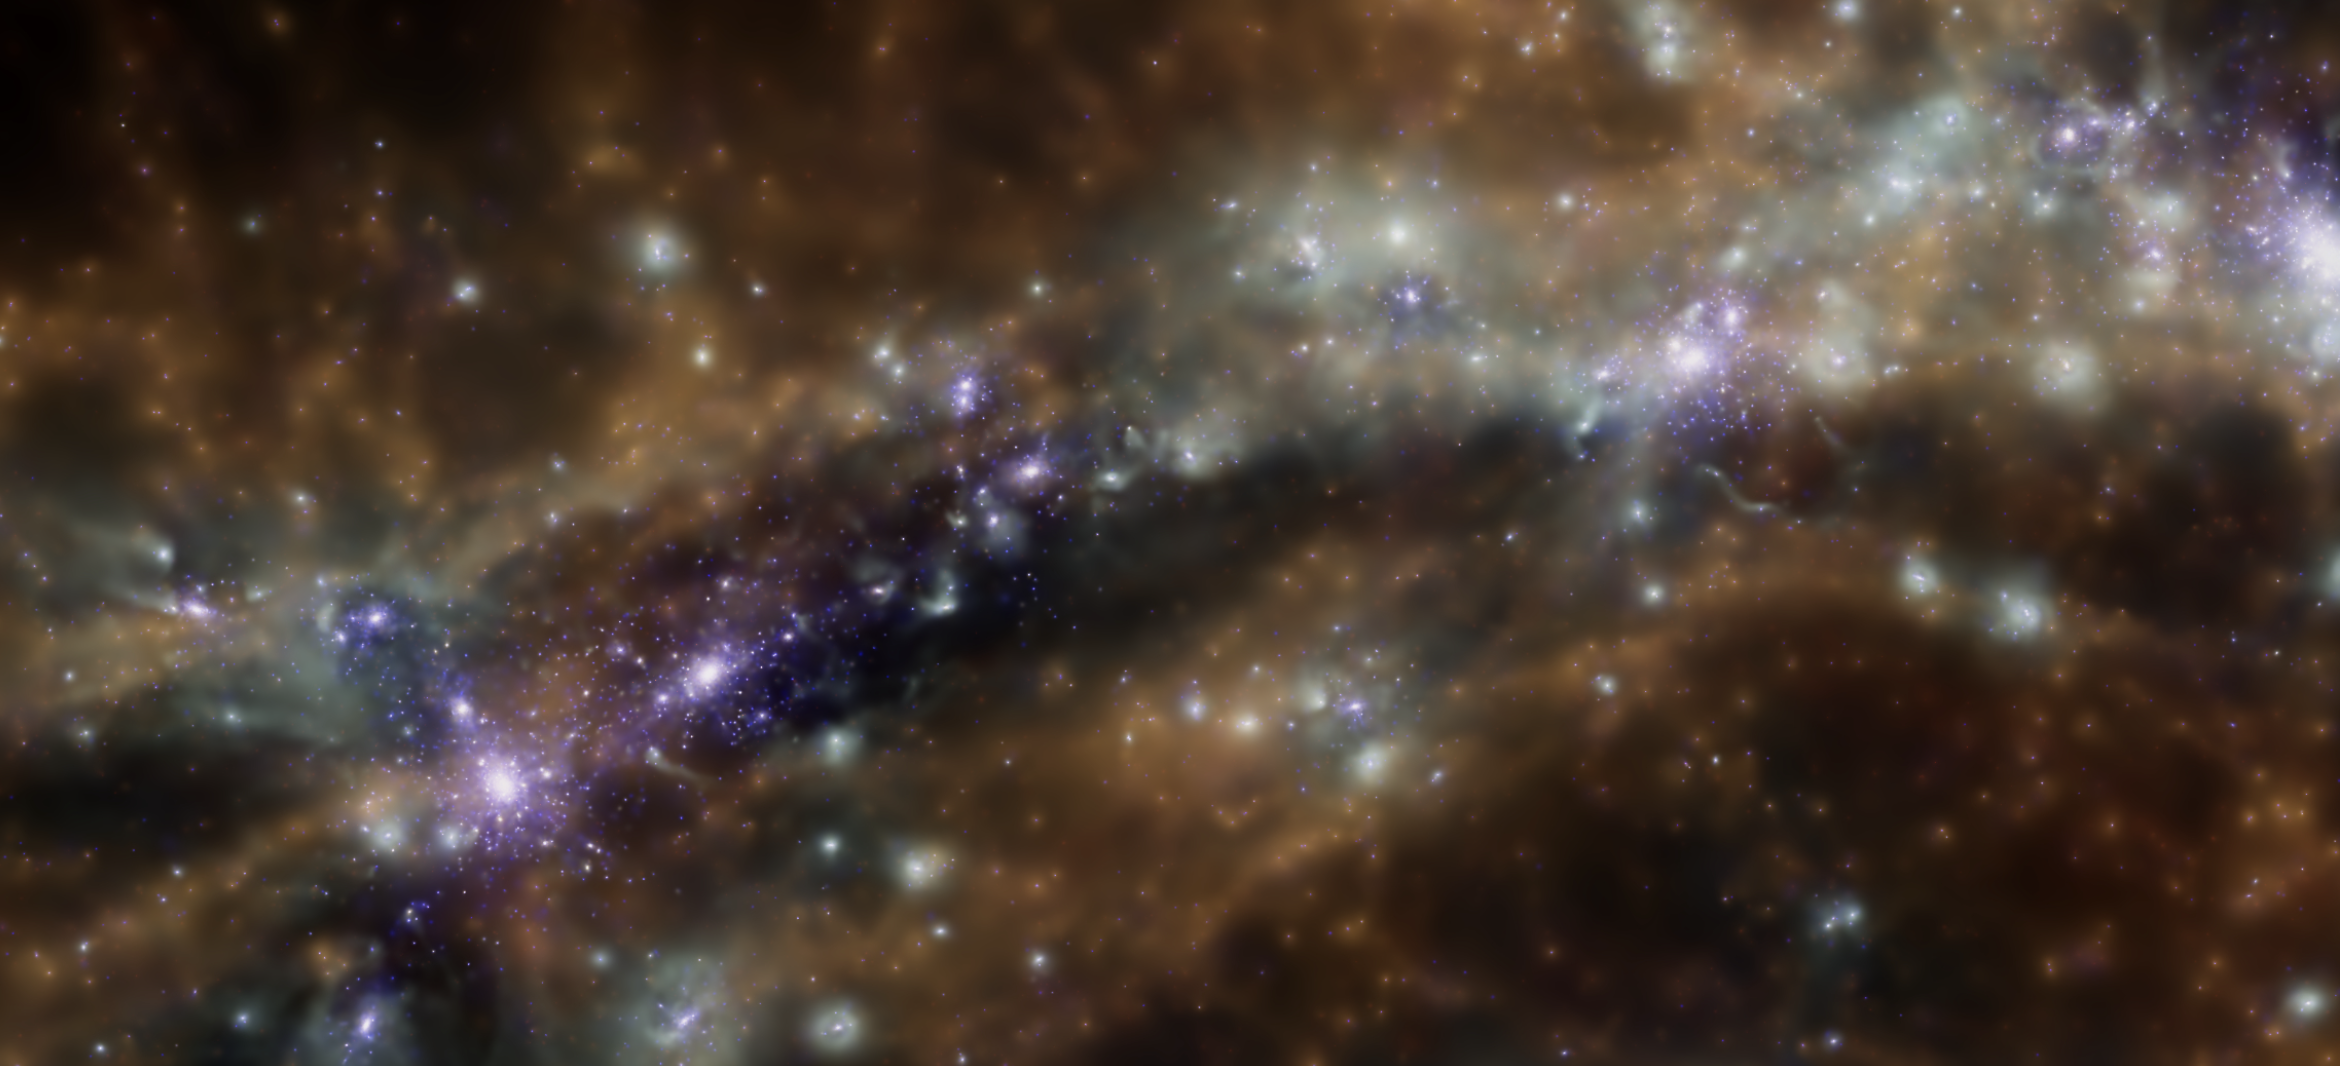 Image, from computer simulations, of a cosmic current. Credit: K. Dolag, Ludwig-Maximilians (Universität München)